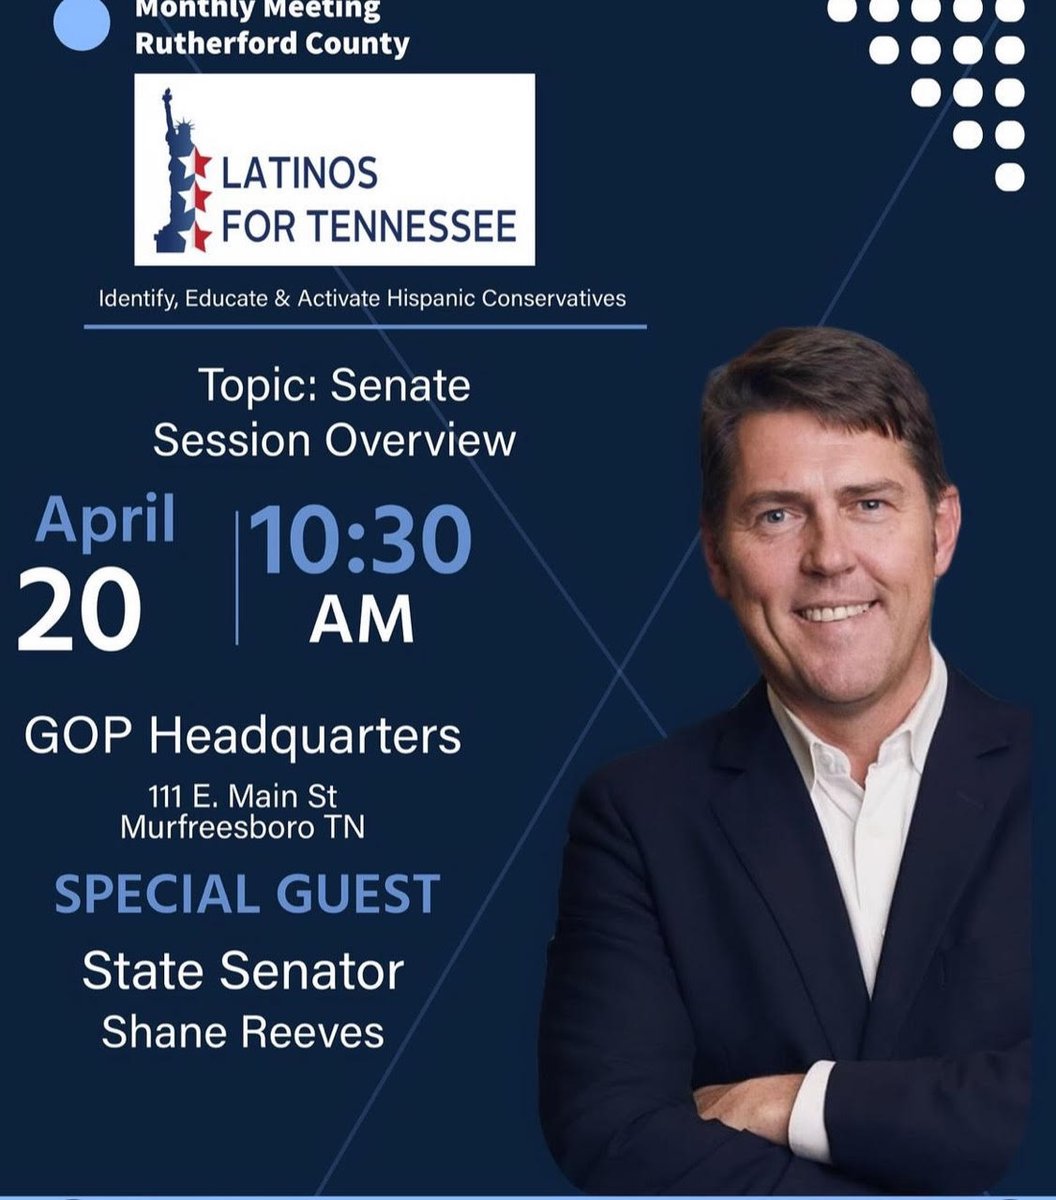 Honored to be the special guest at the Latinos for Tennessee monthly meeting in Rutherford County! I hope to see you on April 20th at 10:30 a.m.